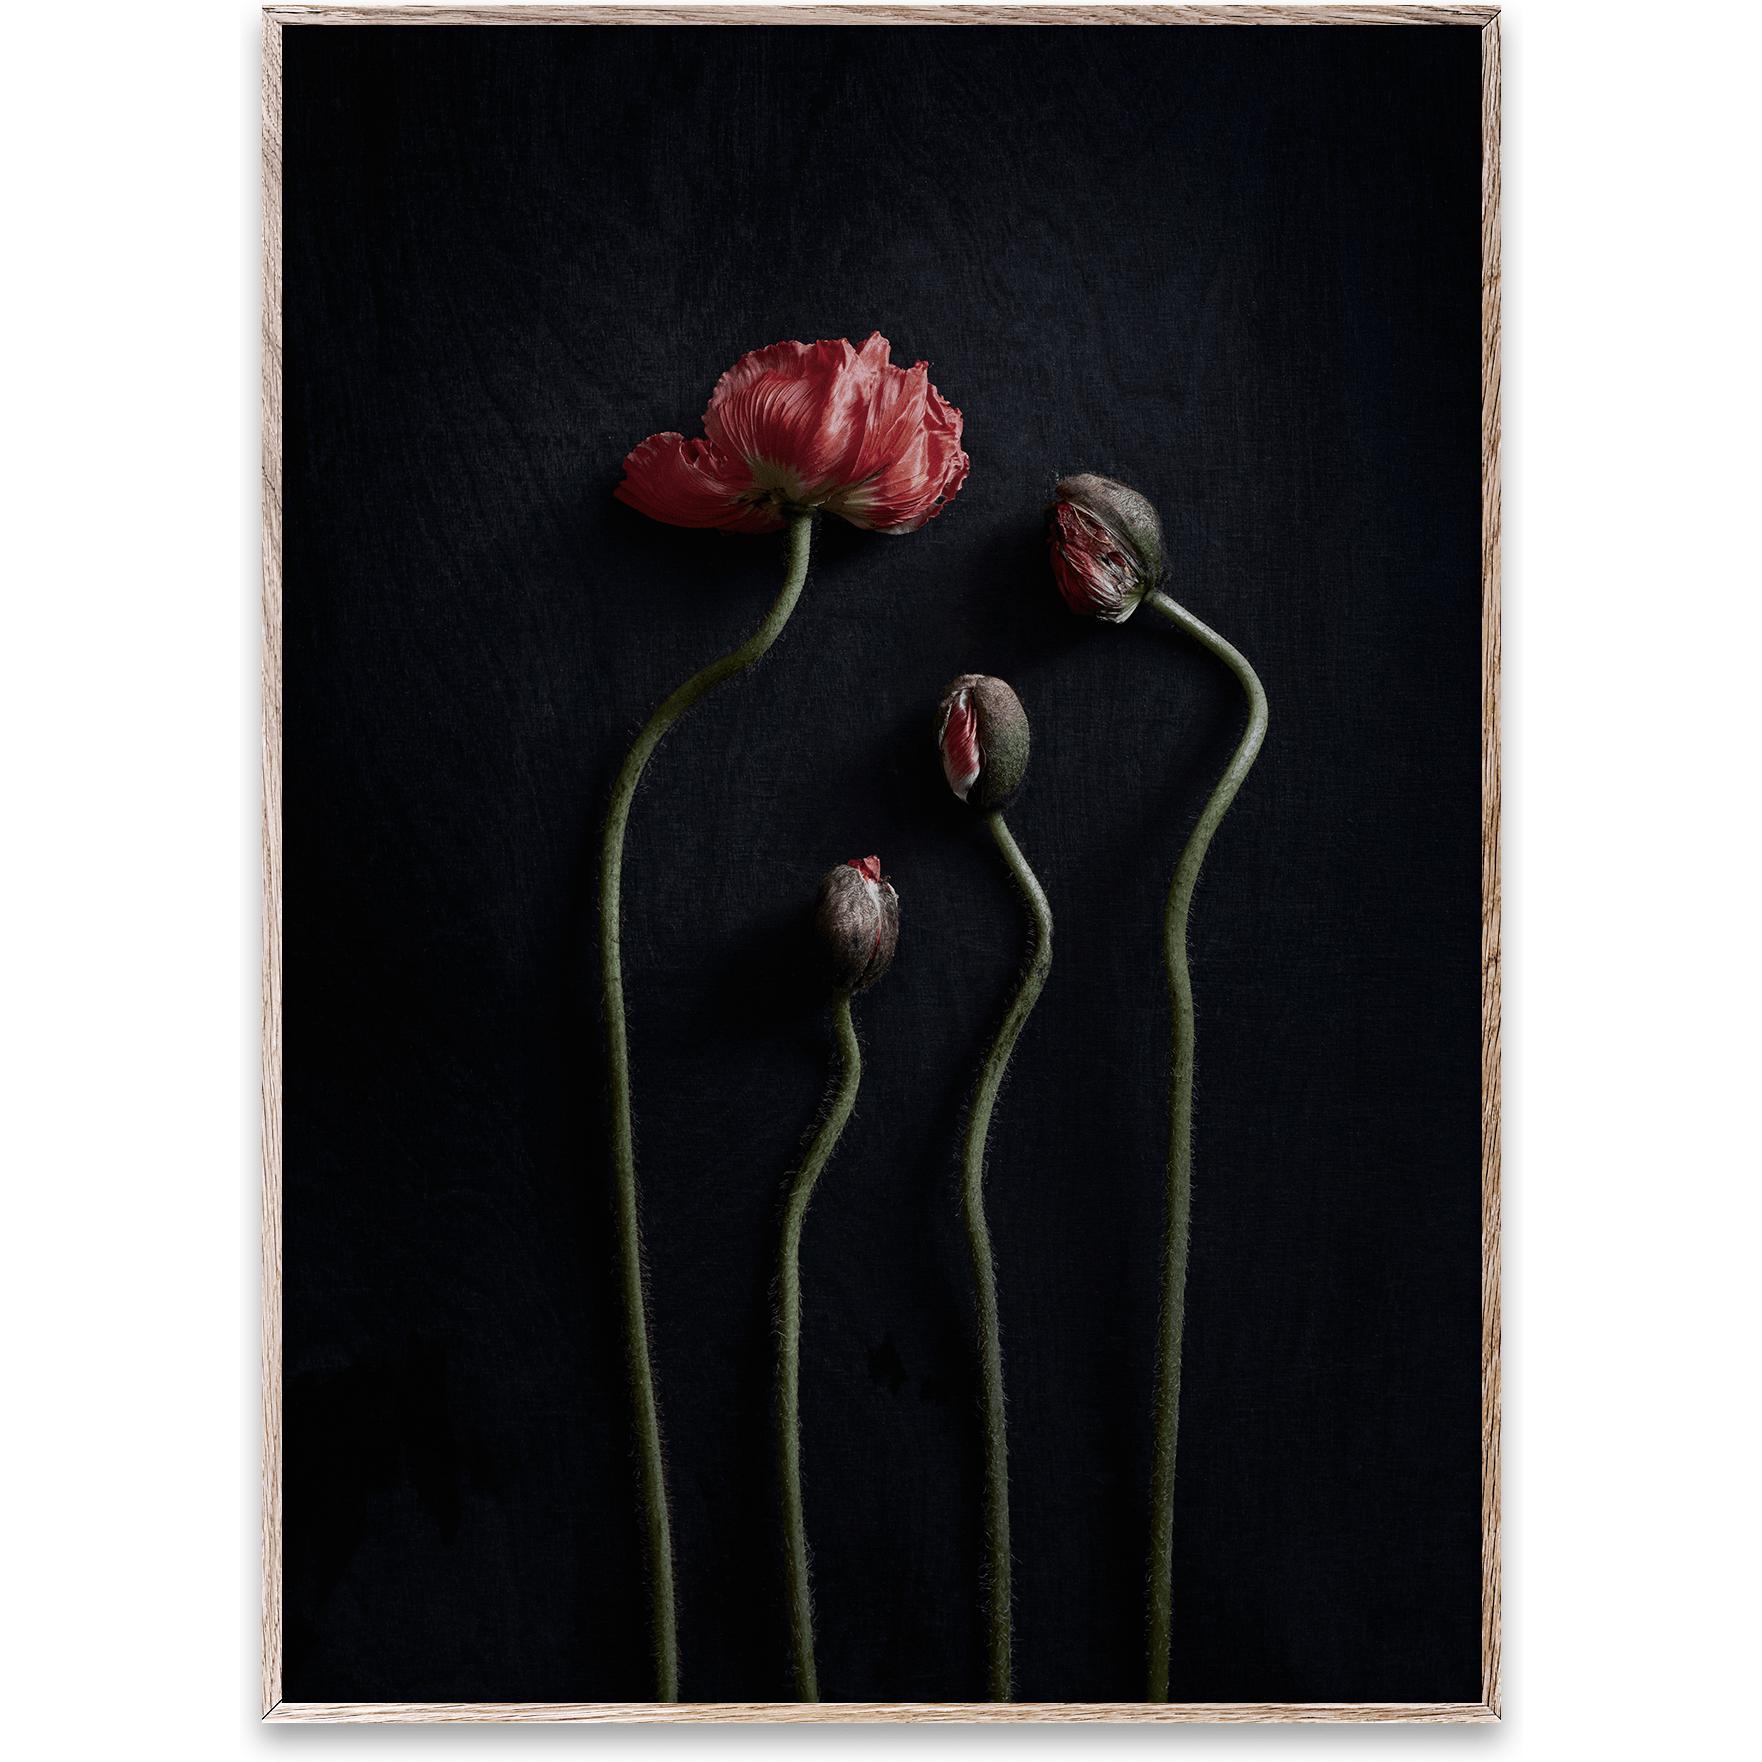 Paper Collective Still Life 02 Poster, 50x70 Cm